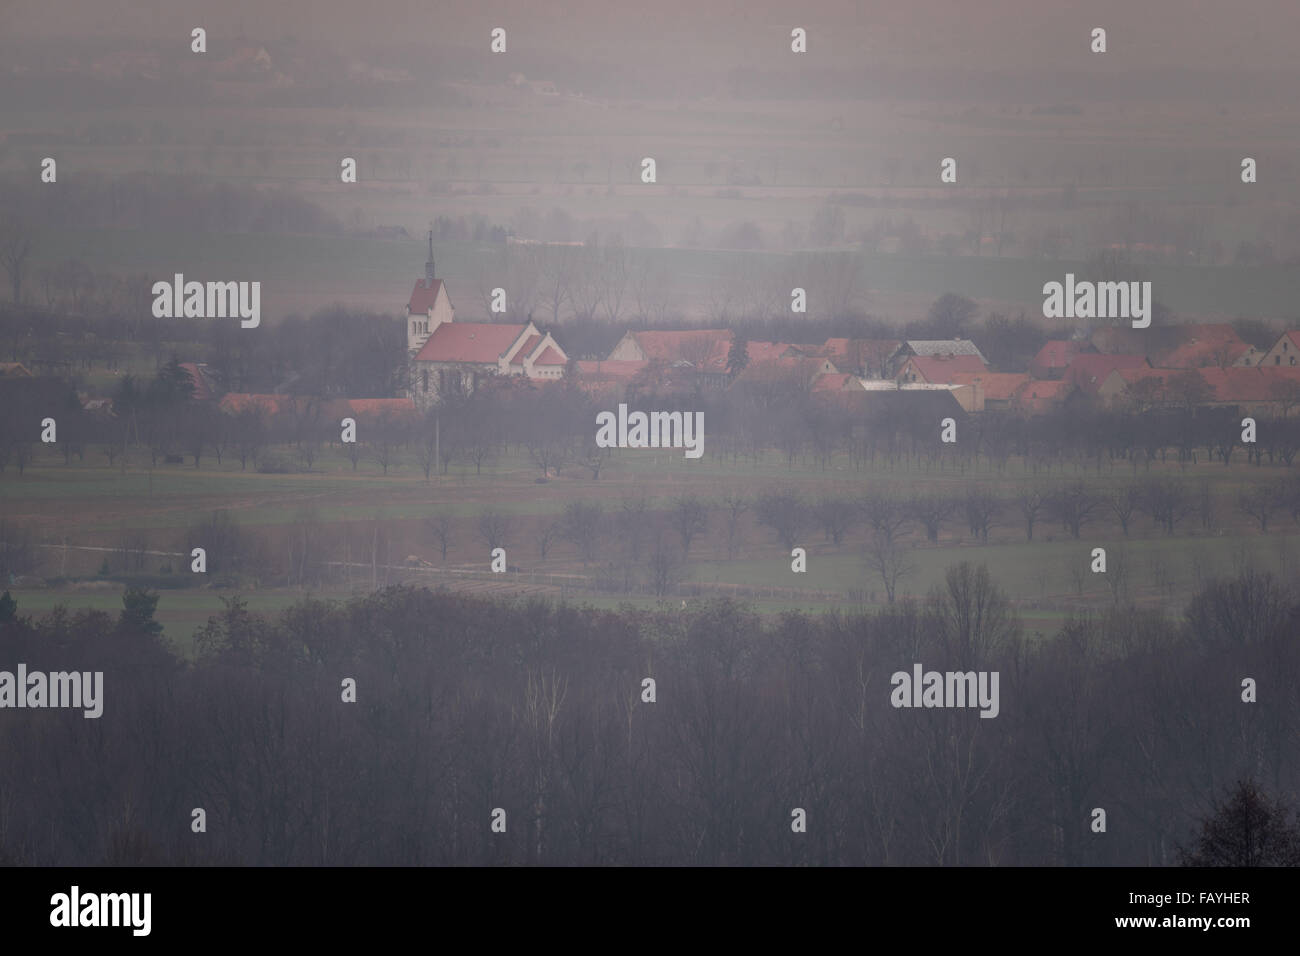 Myslakow village among fields pictured in the old school manner vignetting Stock Photo